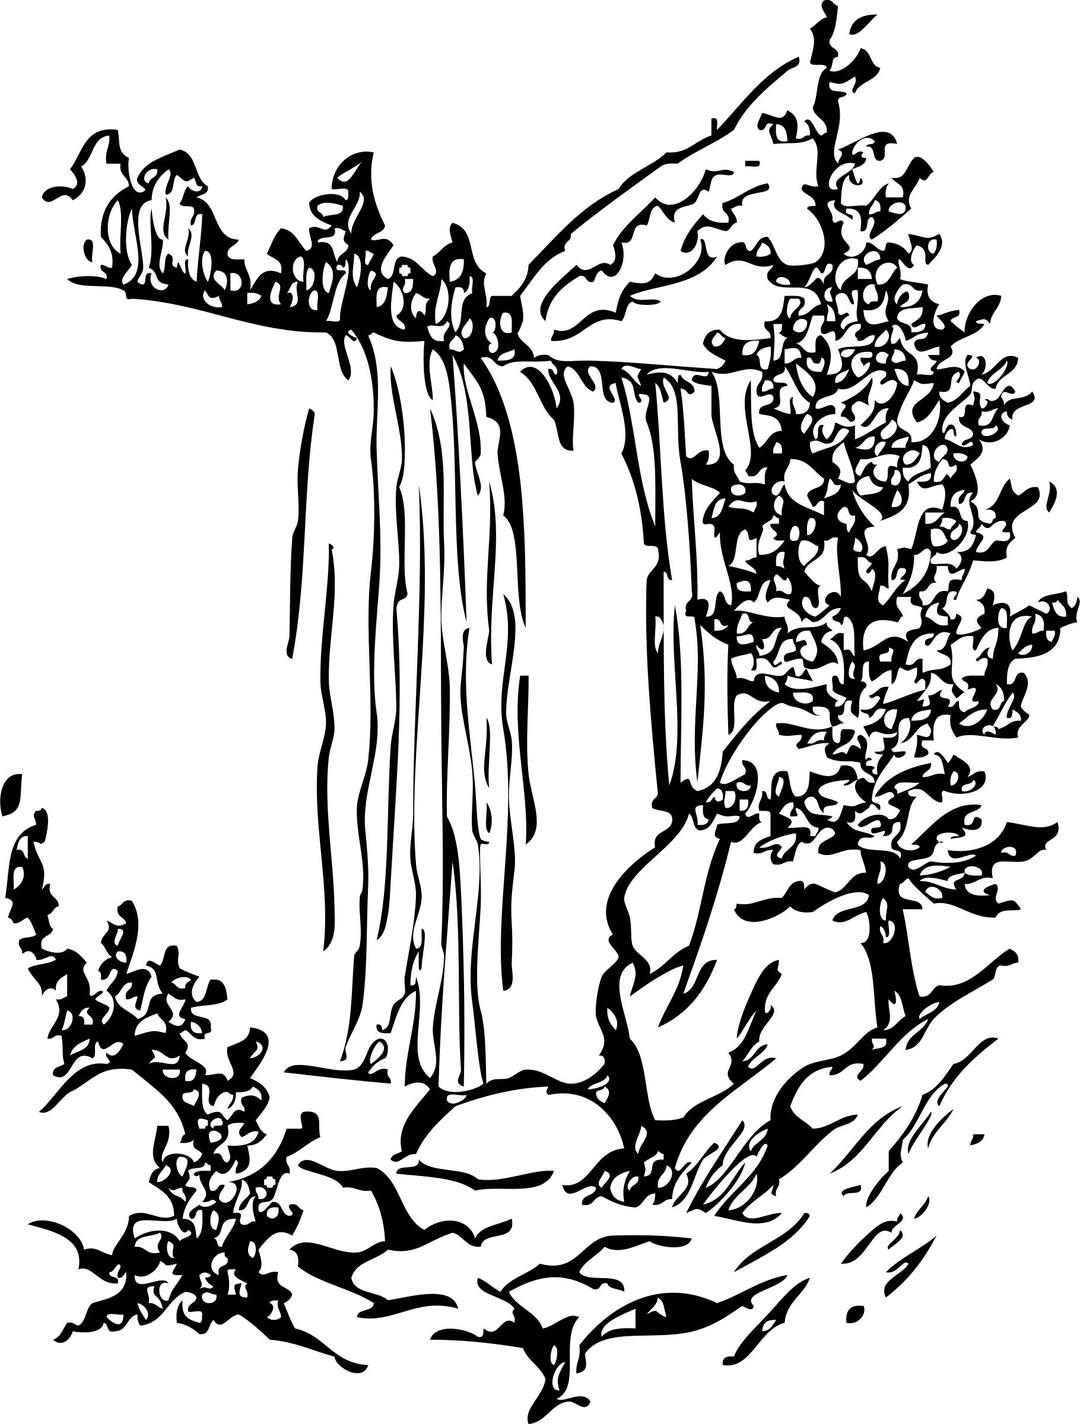 waterfall by cybergedeon hmm... png transparent